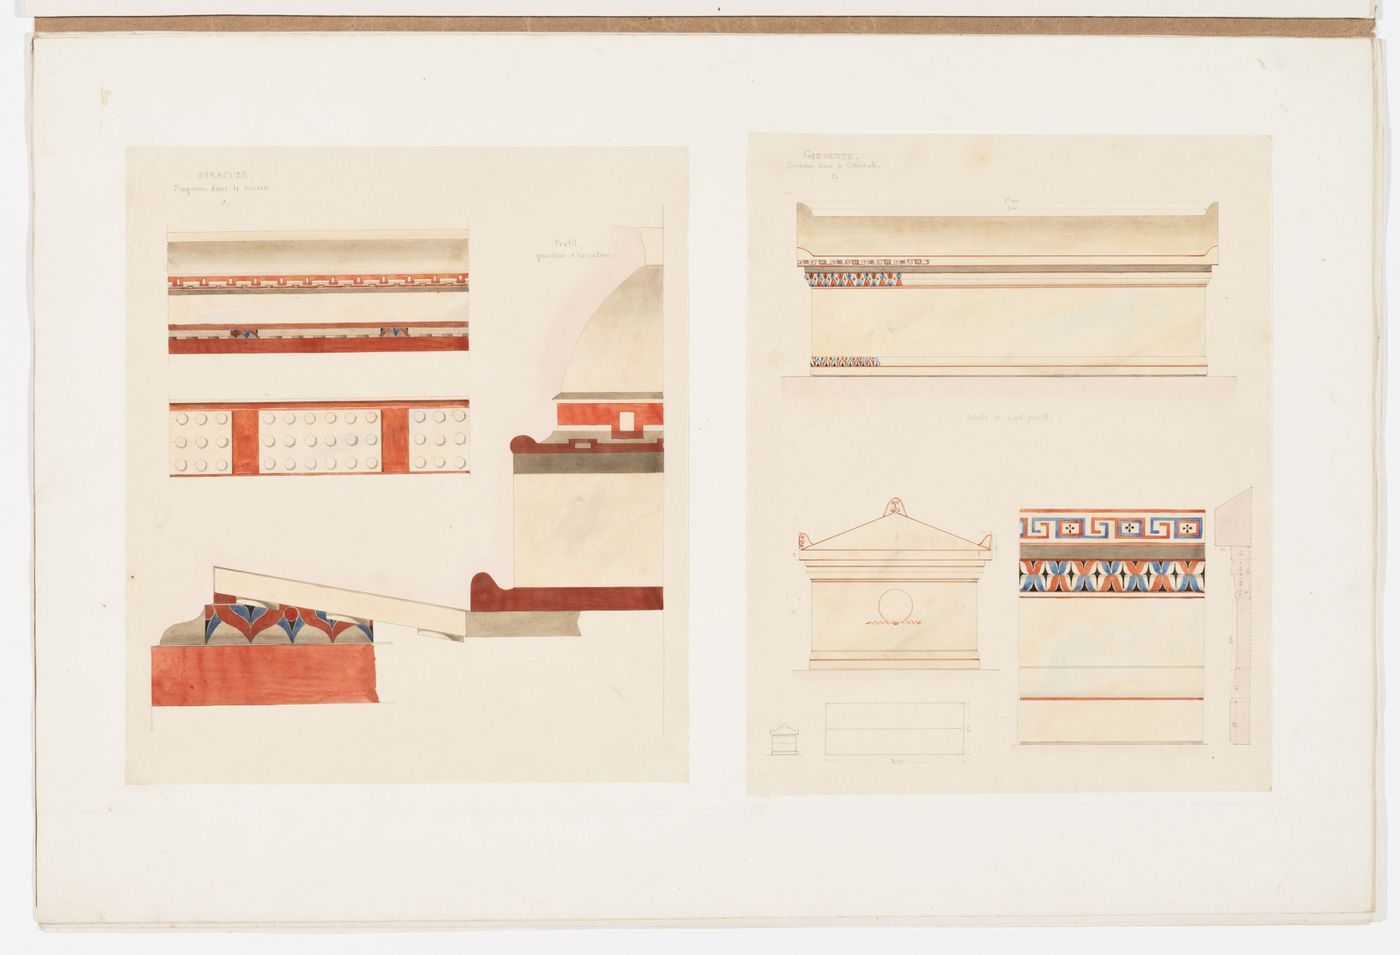 Reflected plan, elevation and profile of a capital [?] and ceiling ornament in the museum, Siracusa; Elevations, roof plan, profile, and detail of the ornamentation of the tomb in the cathedral, Agrigento